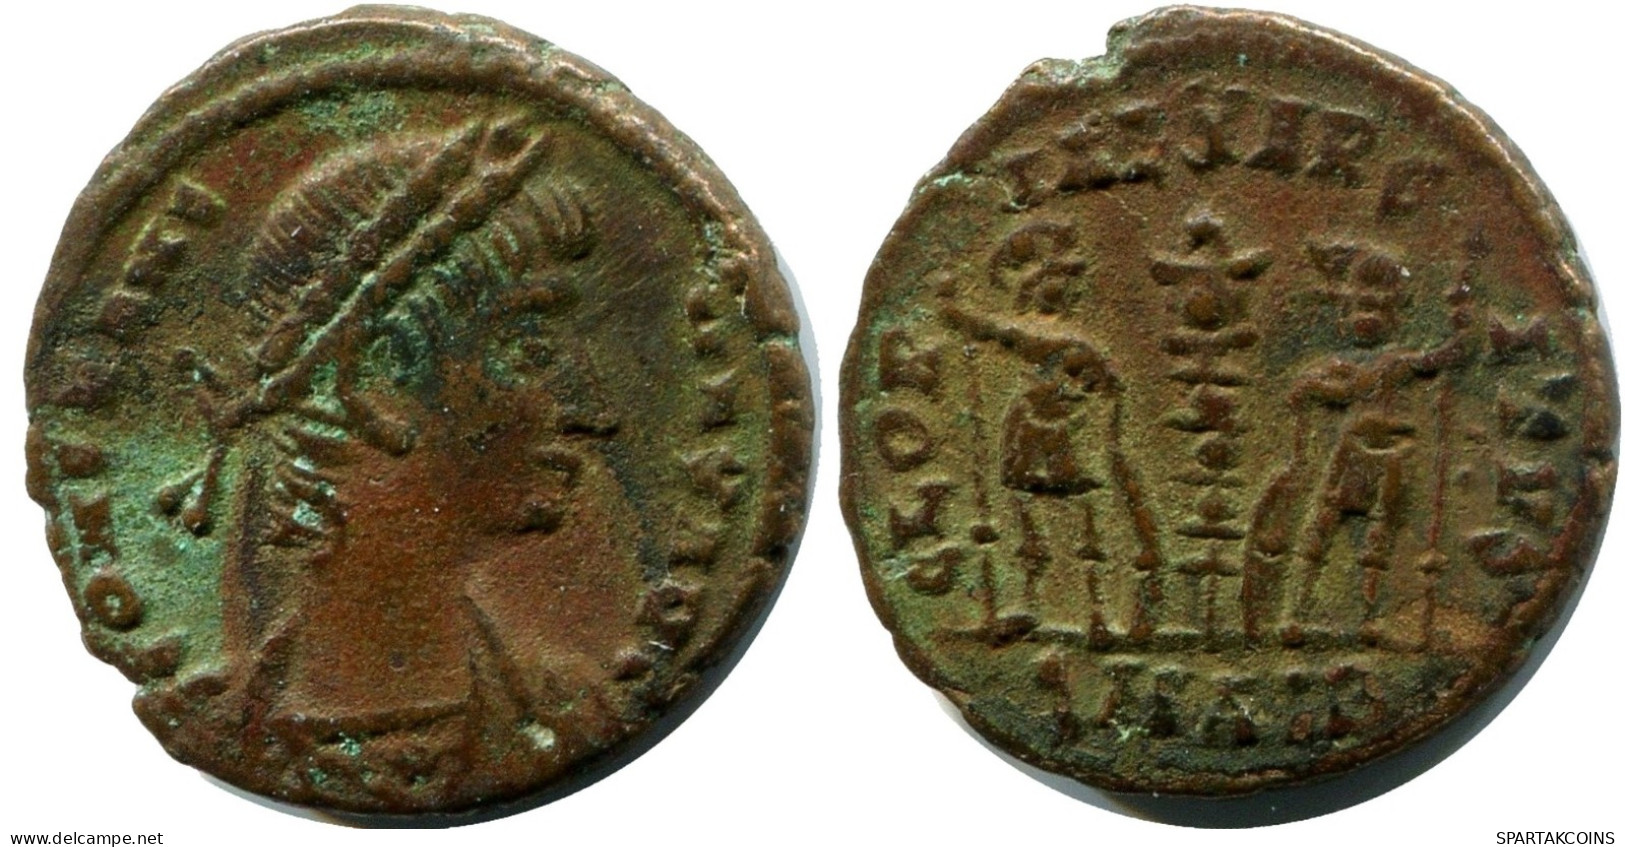 CONSTANS MINTED IN ALEKSANDRIA FROM THE ROYAL ONTARIO MUSEUM #ANC11394.14.D.A - The Christian Empire (307 AD To 363 AD)